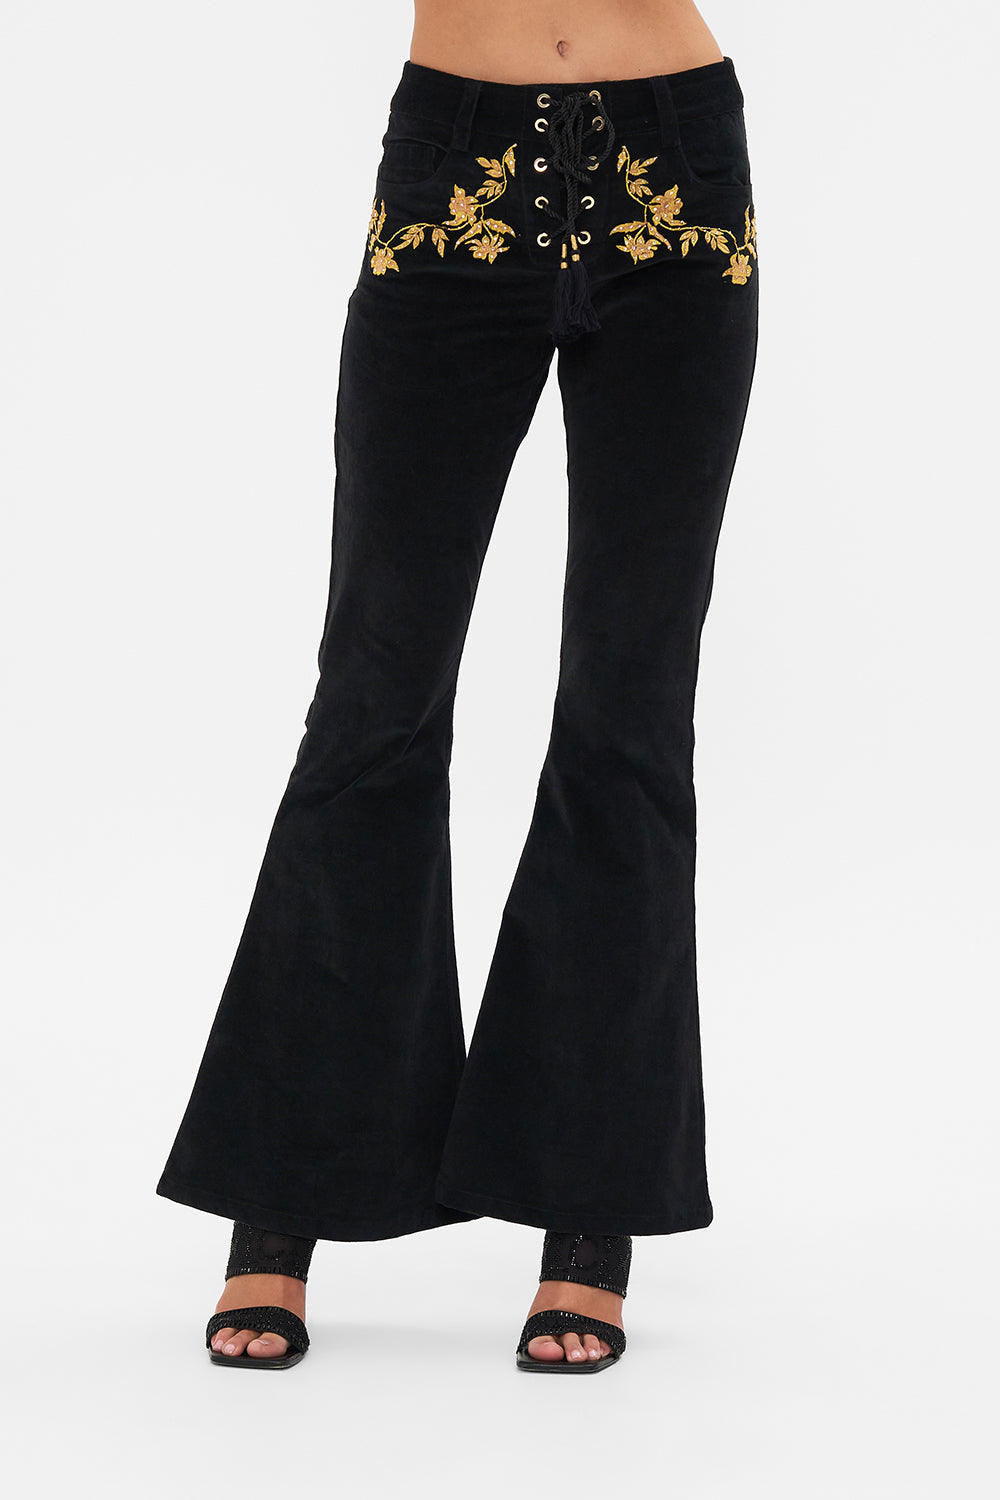 CAMILLA floral Eyelet Front Pant in Stitched in Time